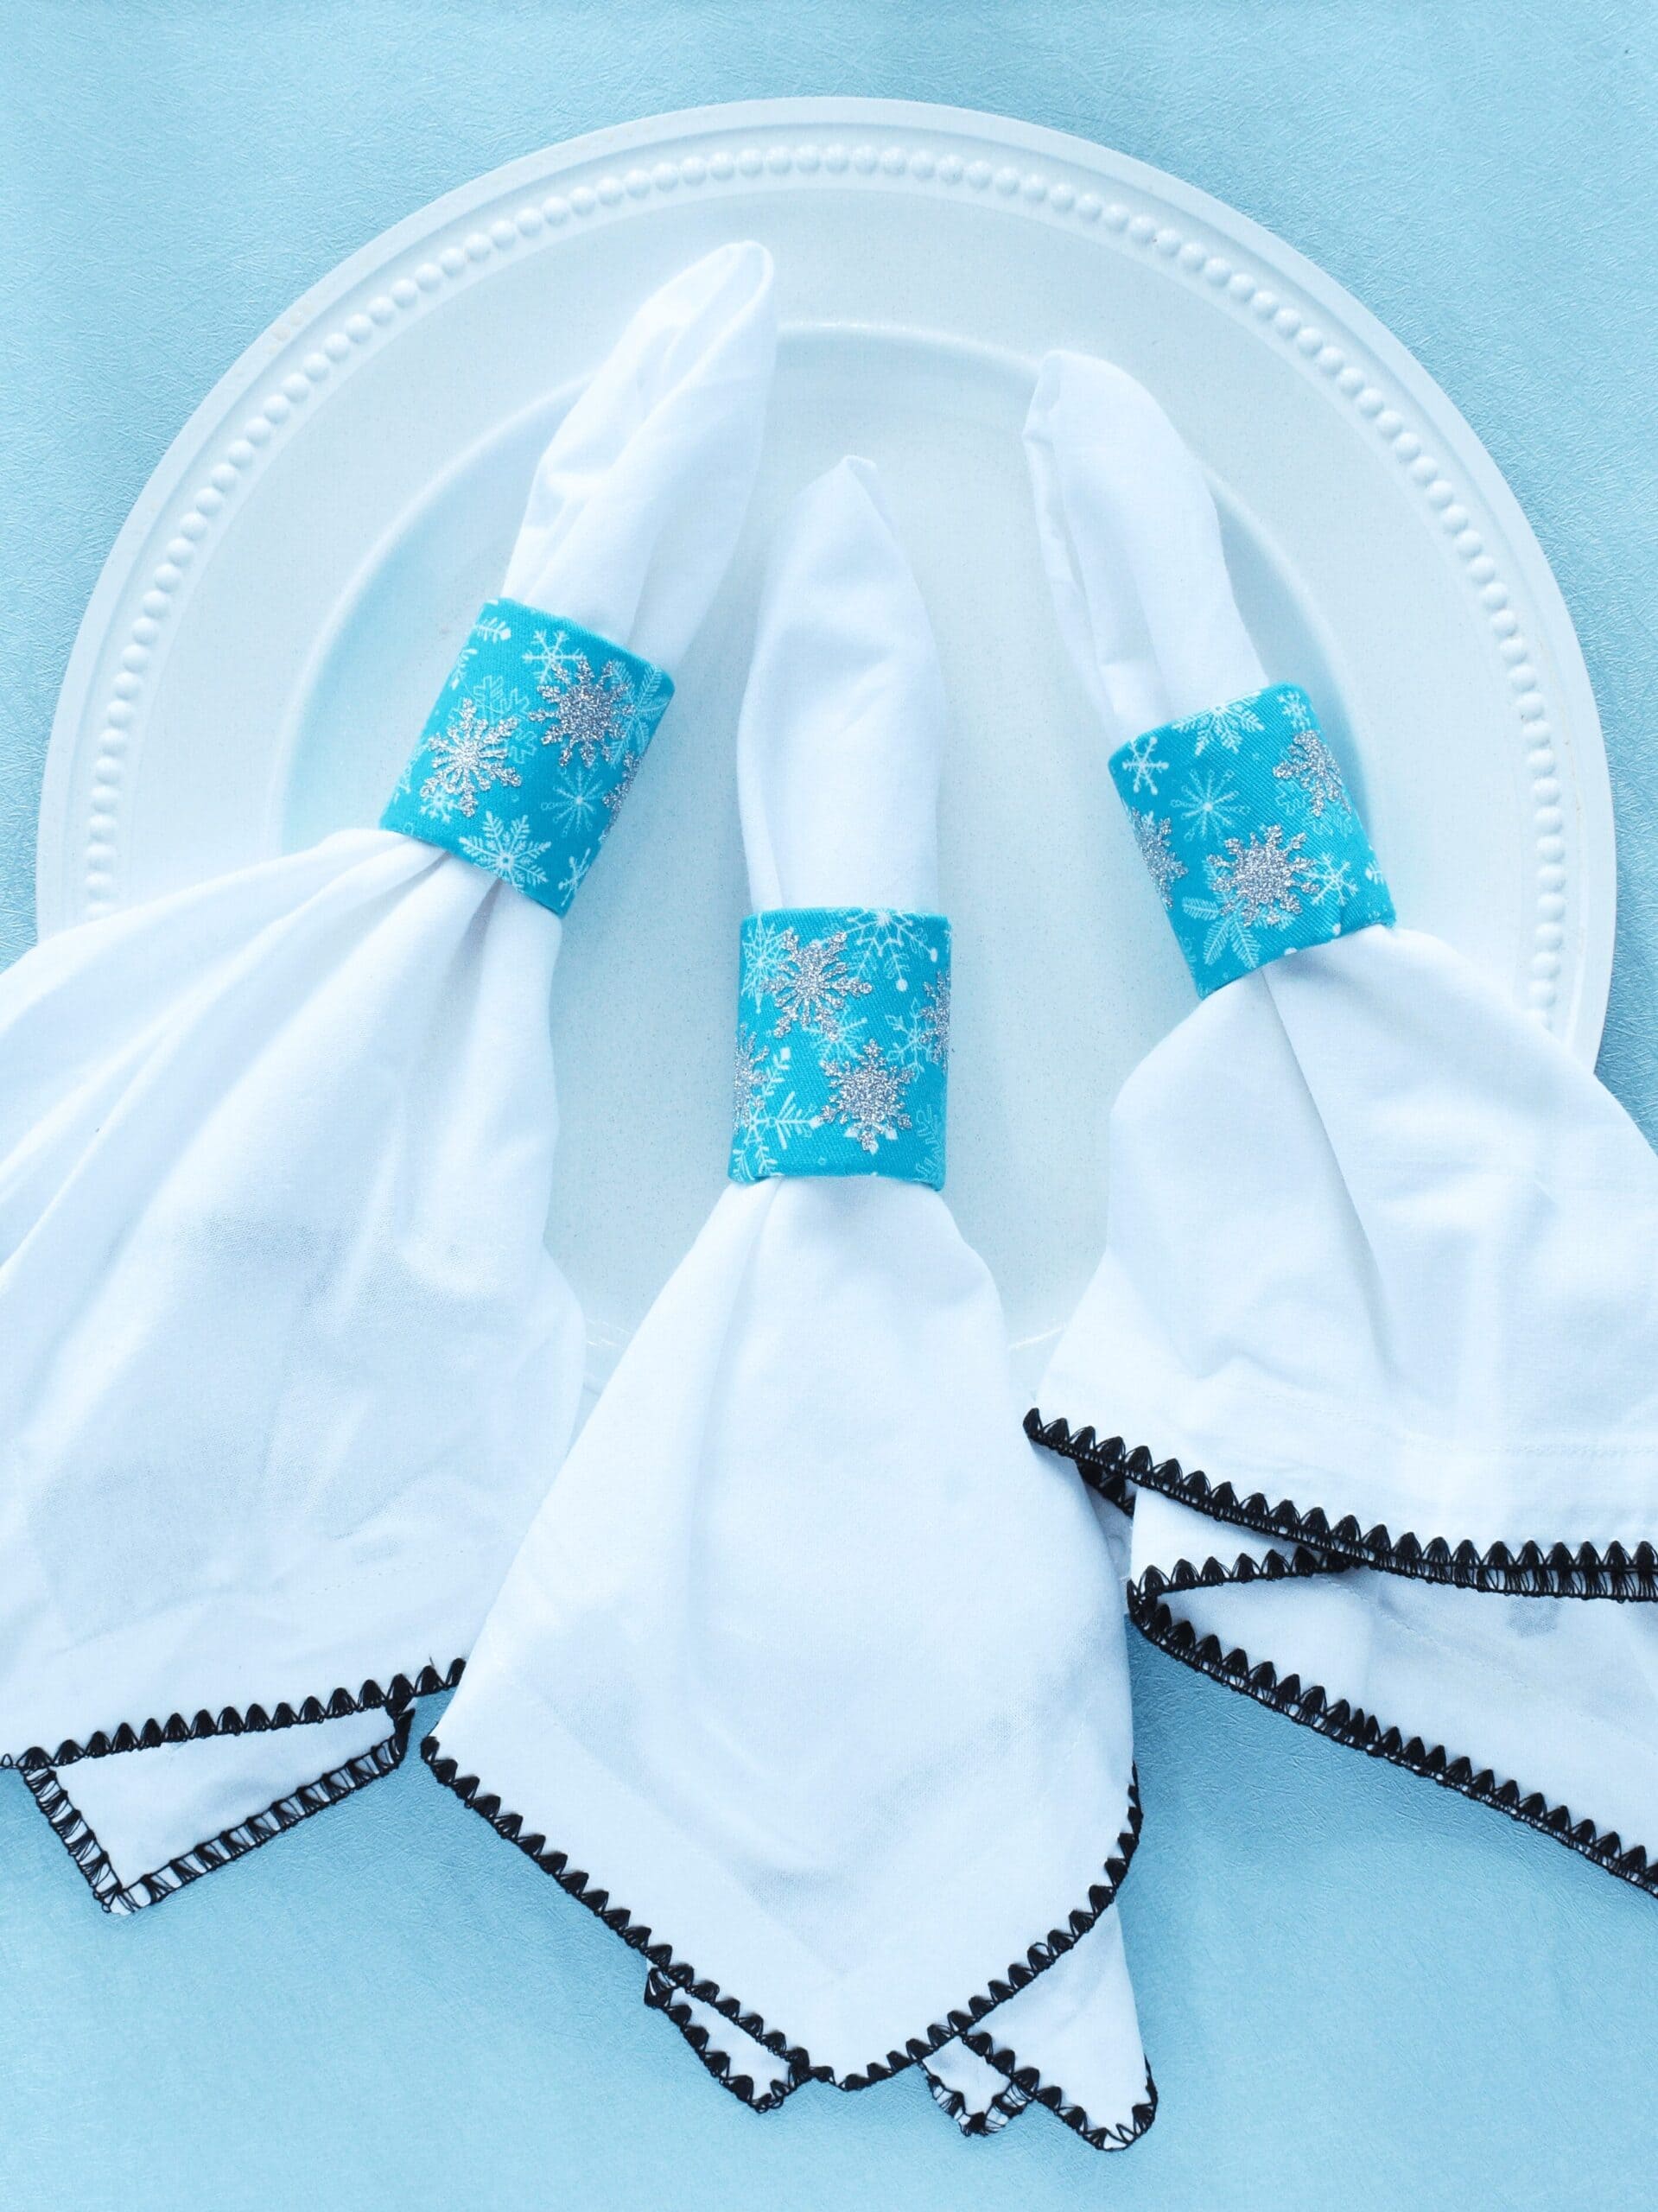 White napkins with black trim look festive and ready for a holiday tablescape thanks to upcycled cardboard tube napkin rings. The rings are covered in blue snowflake print fabric, and the napkins are against a white plate on a light blue background. 